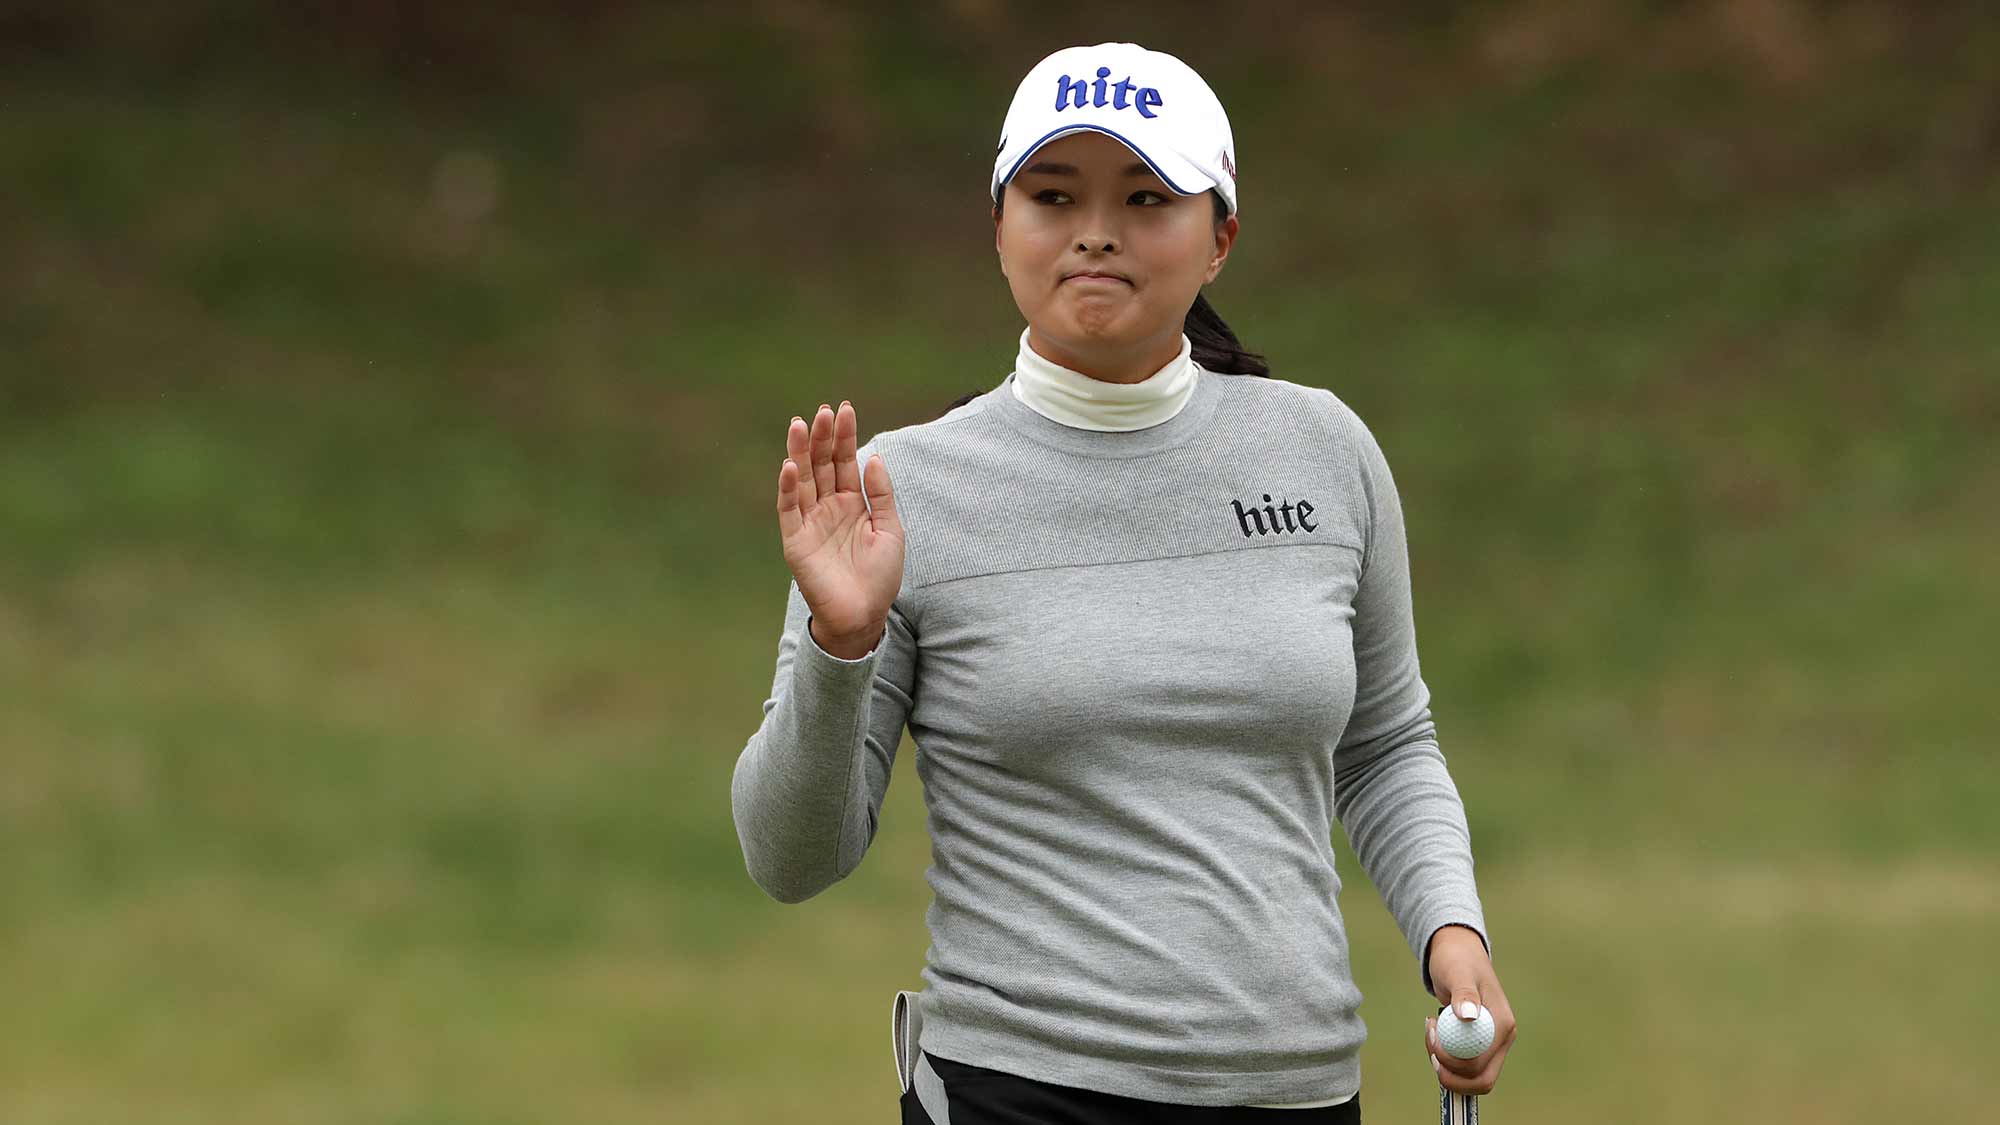 Jin Young Ko of South Korea acknowledges the gallery on the seven hole during Round 1 of 2019 BMW Ladies Championship at LPGA International Busan at on October 24, 2019 in Busan, Republic of Korea